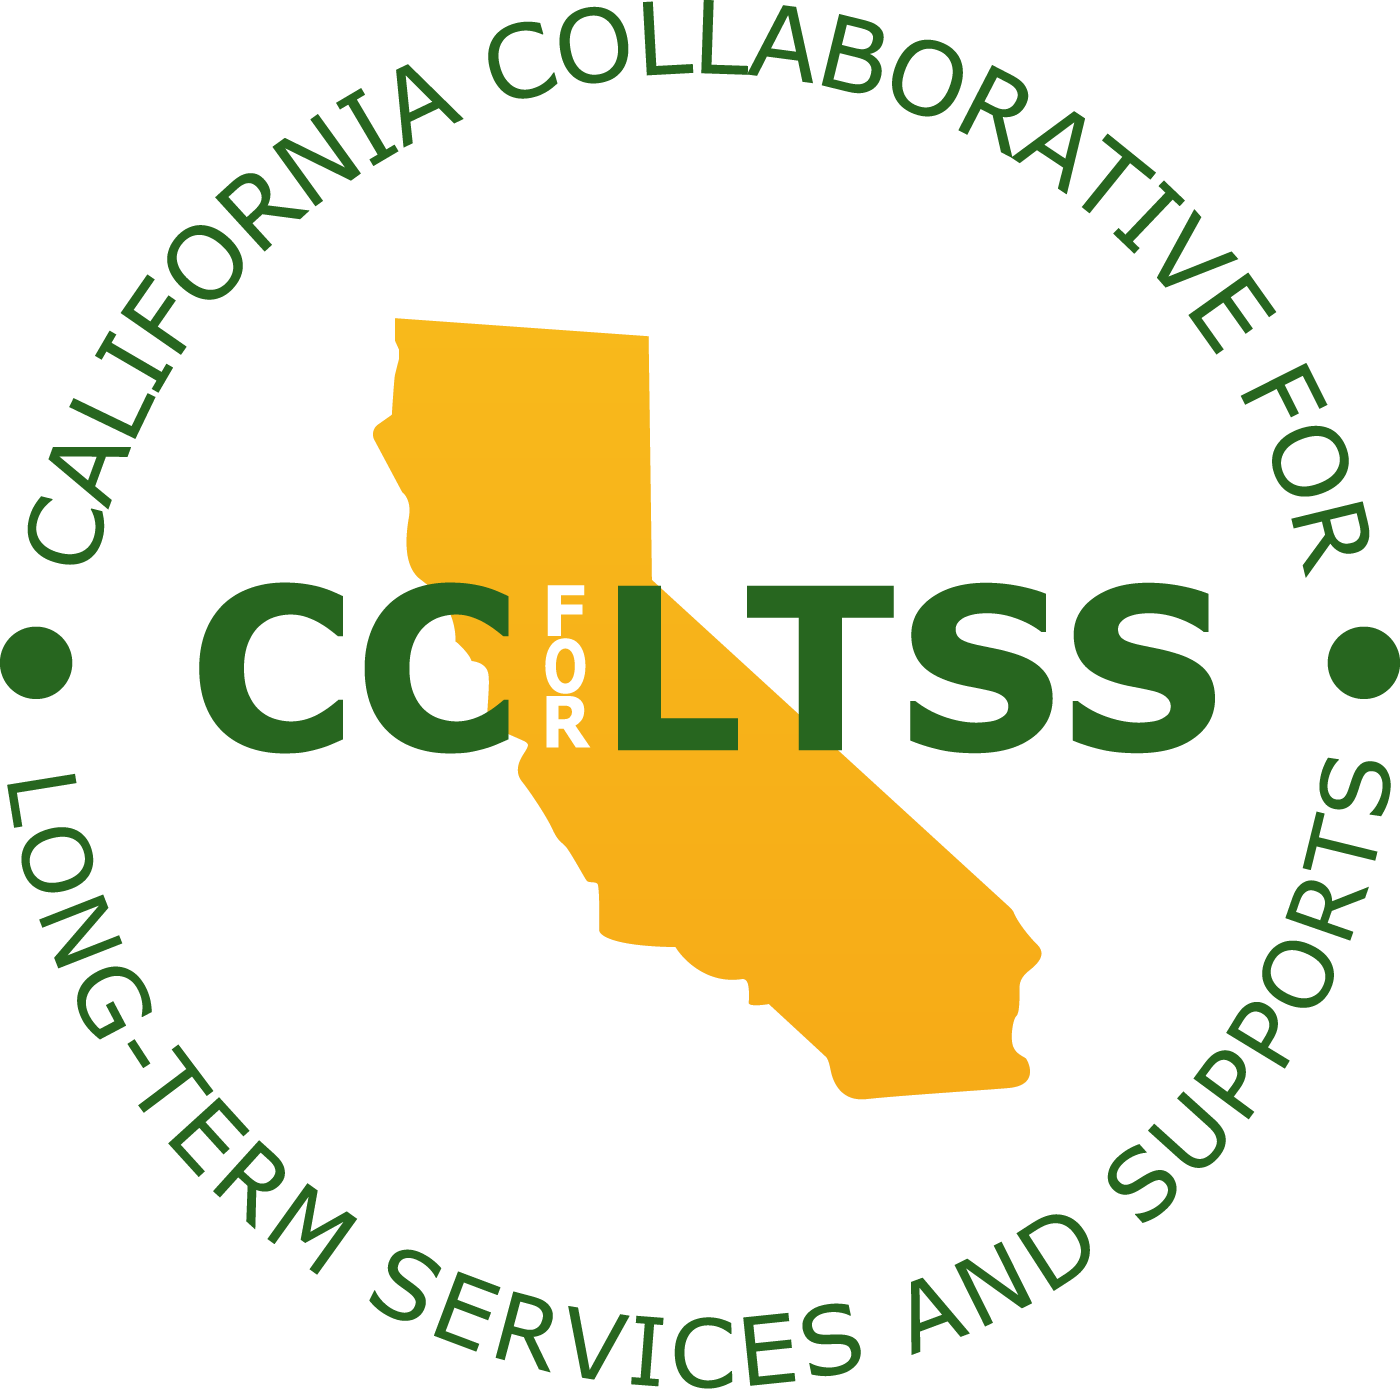 Logo of the California Collaborative for Long Term Services and Supports (CCLTSS). .